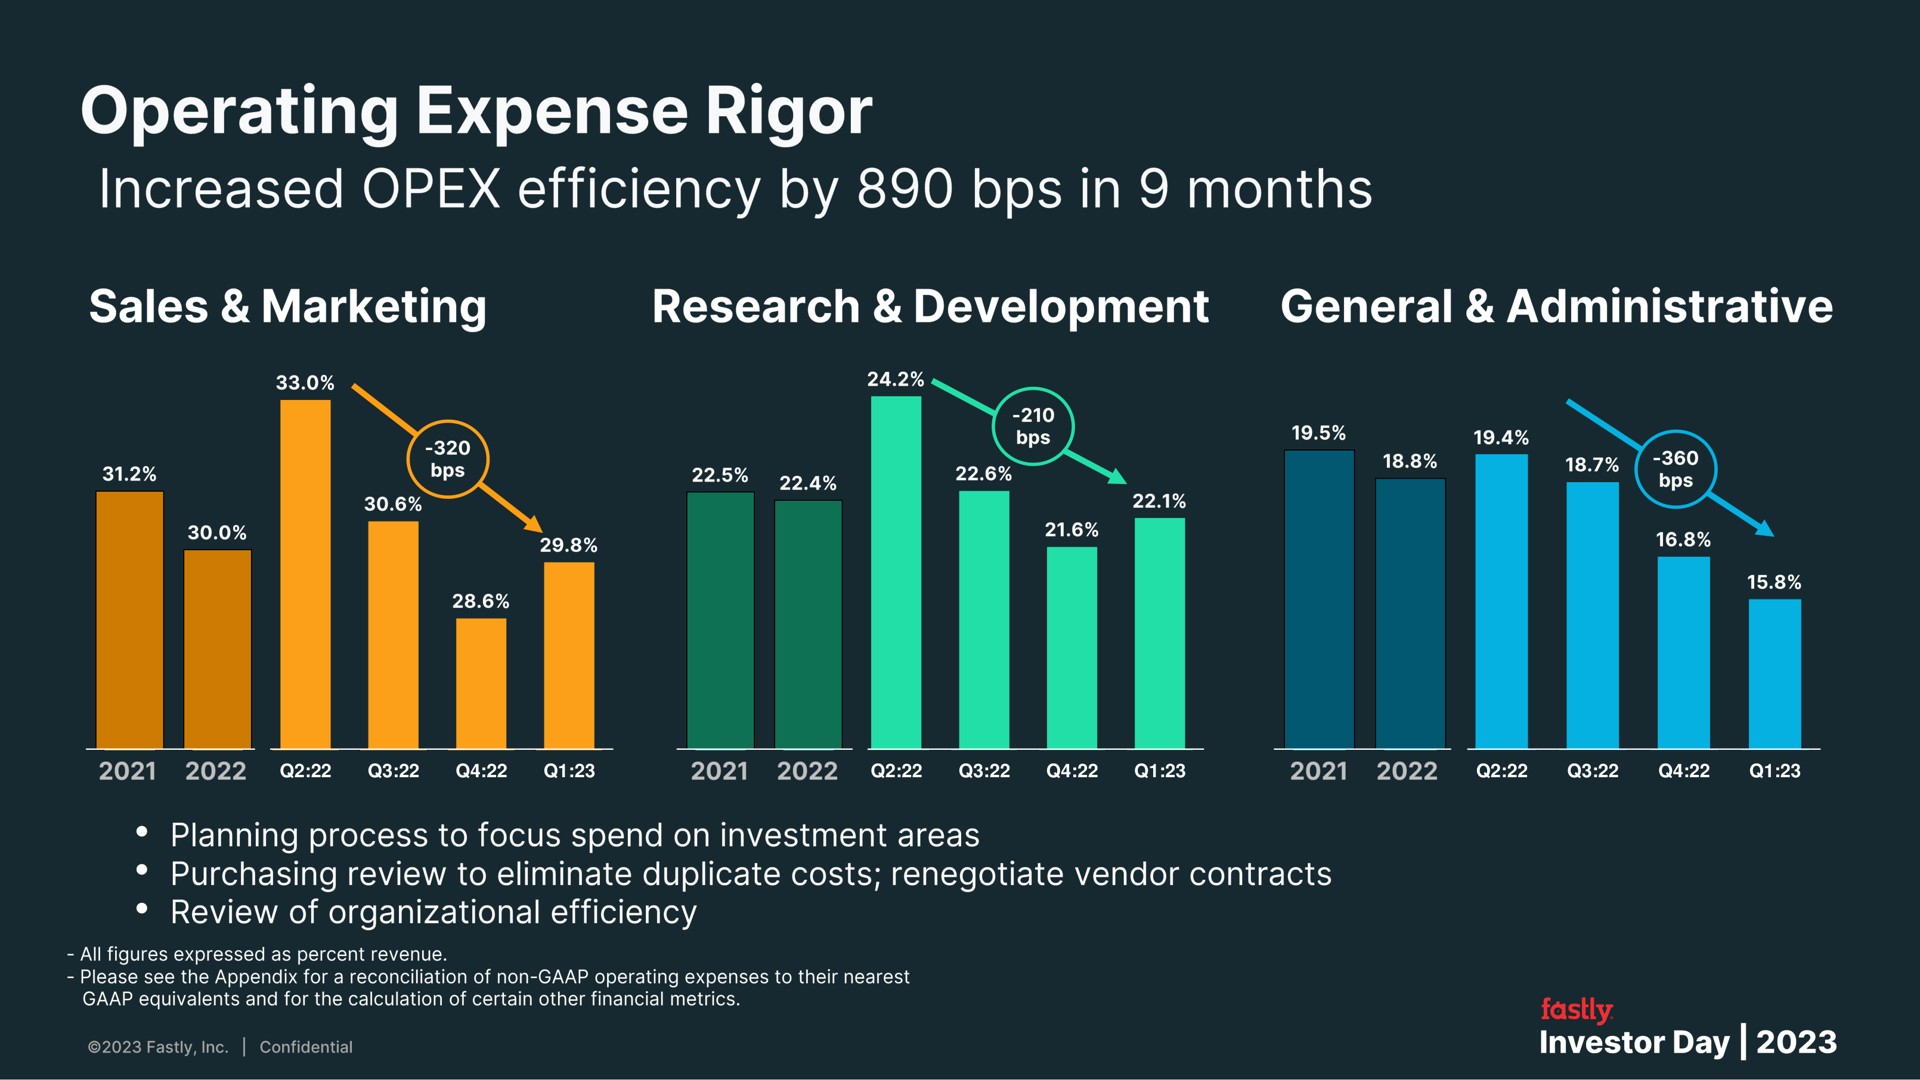 operating expense rigor increased efficiency by in months | Fastly